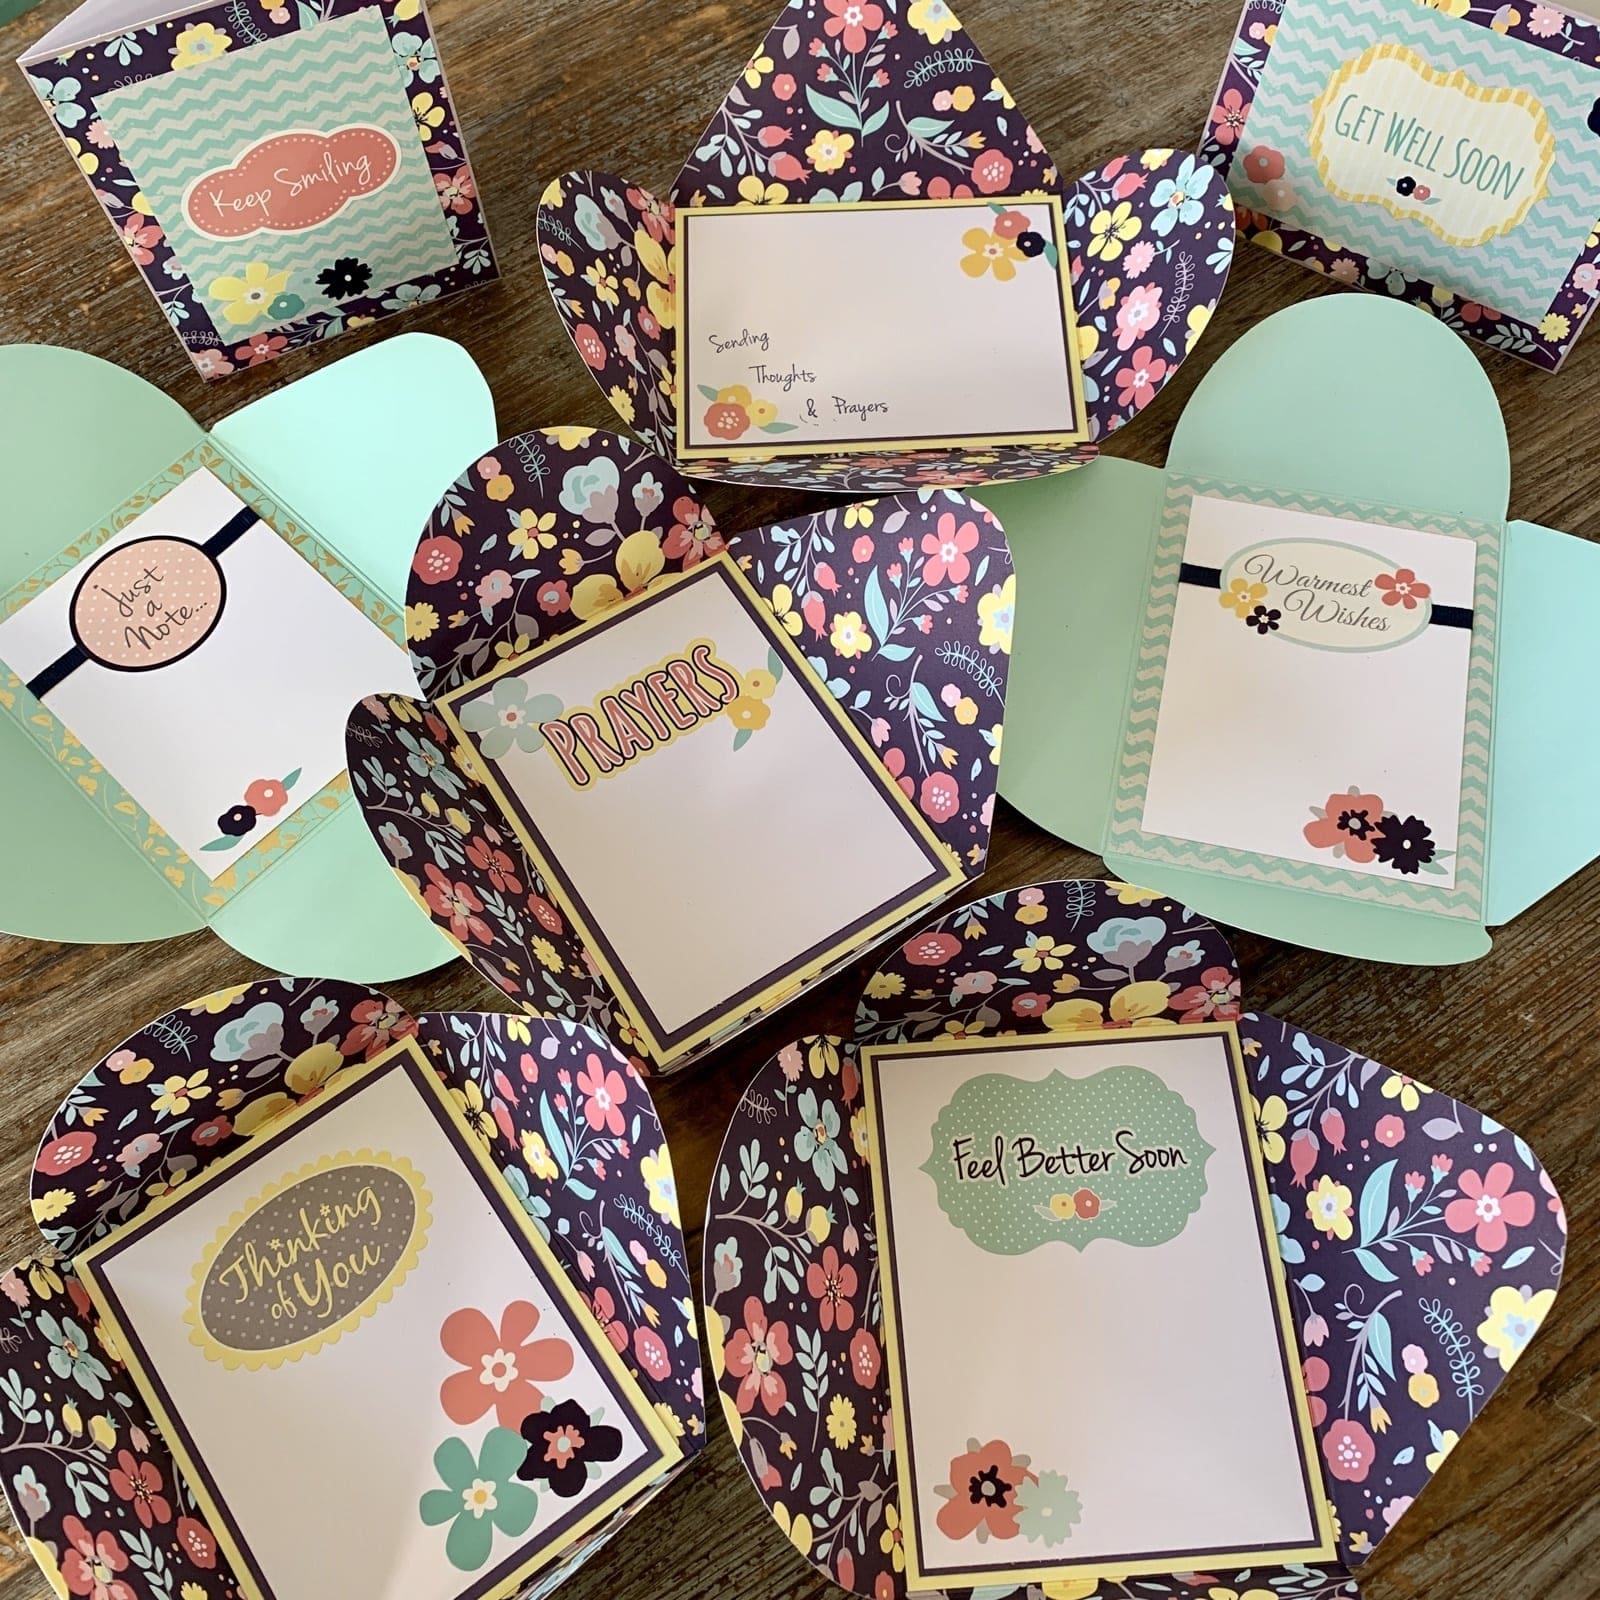 annies cardmaker kit of the month club may 2020